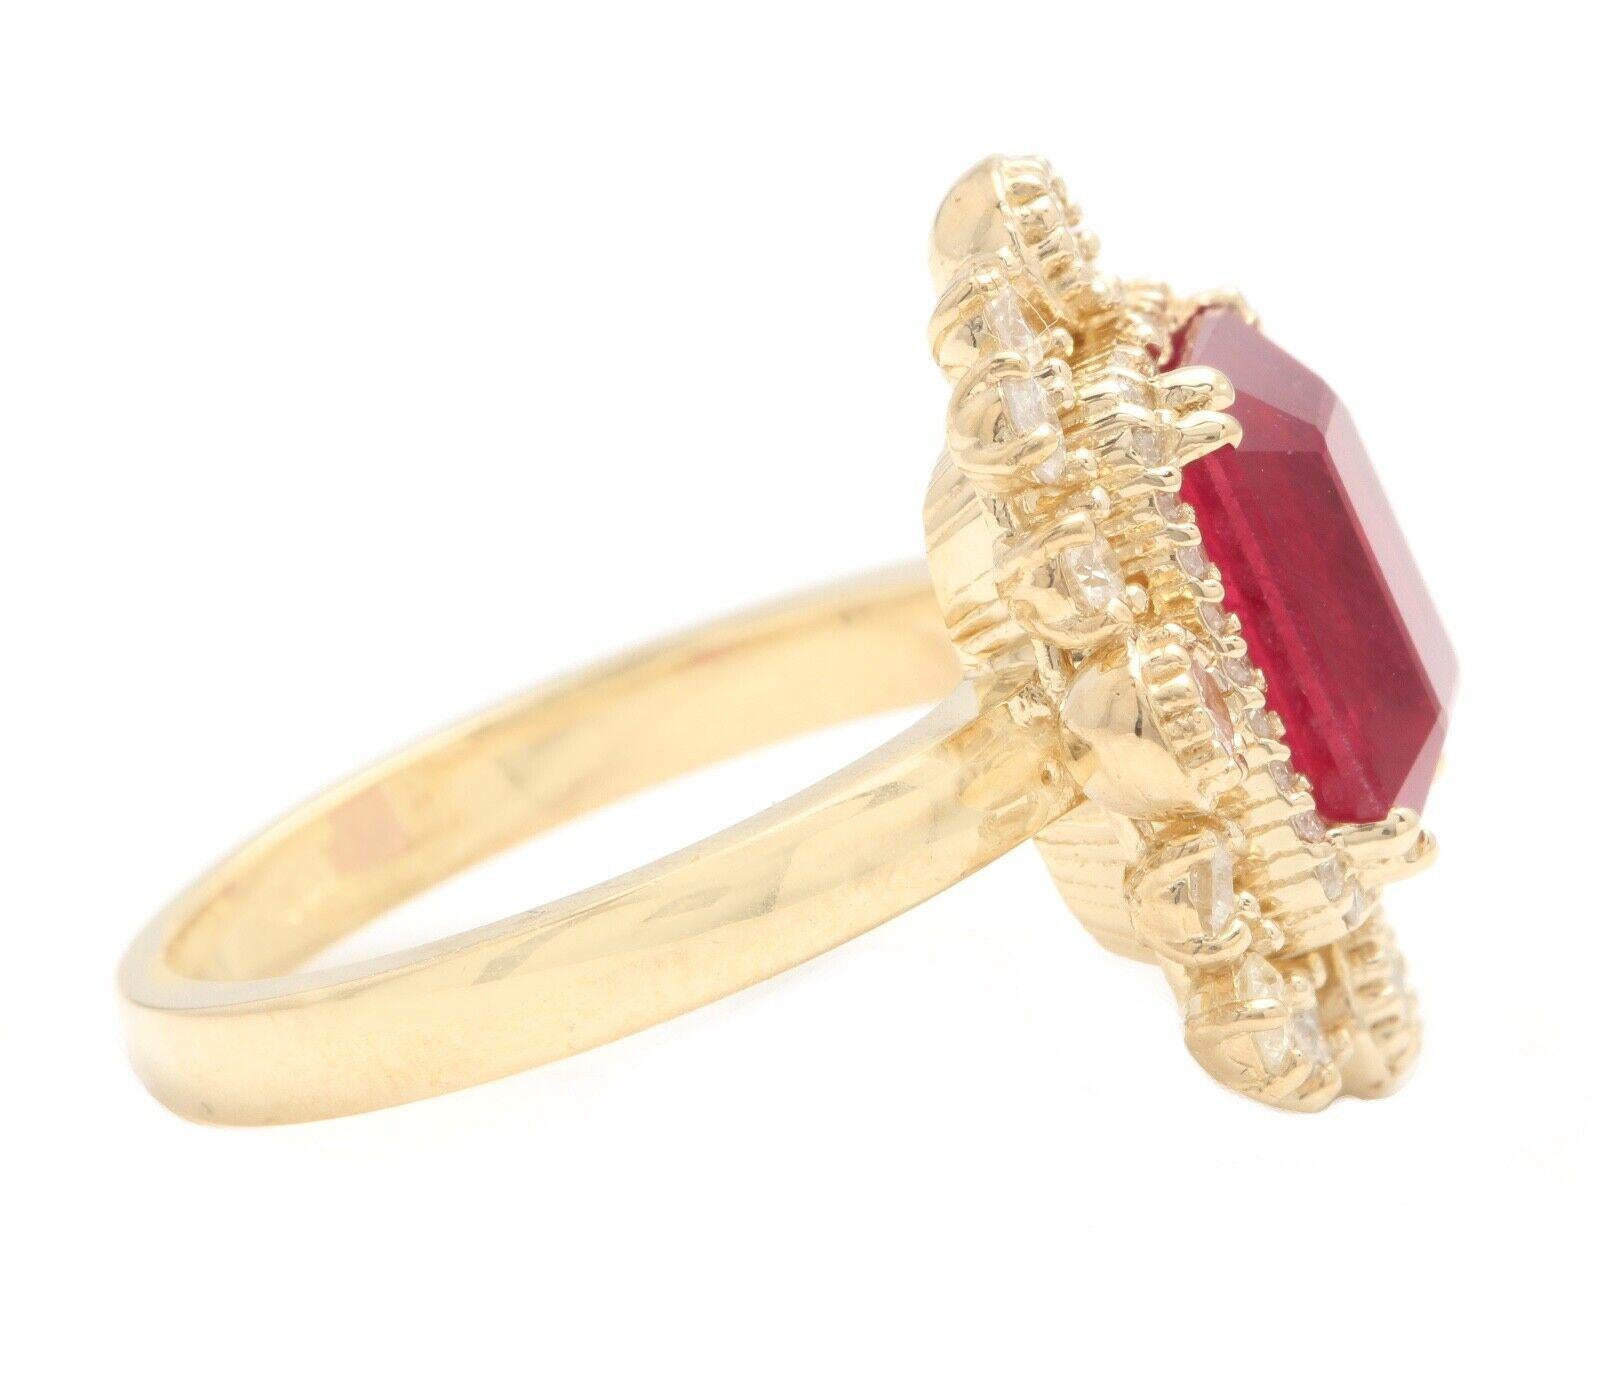 6.50 Carats Natural Ruby and Diamond 14K Solid Yellow Gold Ring

Suggested Replacement Value: $6,000.00

Total Natural Ruby Weight is: Approx. 5.50 Carats 

Ruby Measures: Approx. 10.00 x 8.00

Natural Round Diamonds Weight: Approx. 1.00 Carats